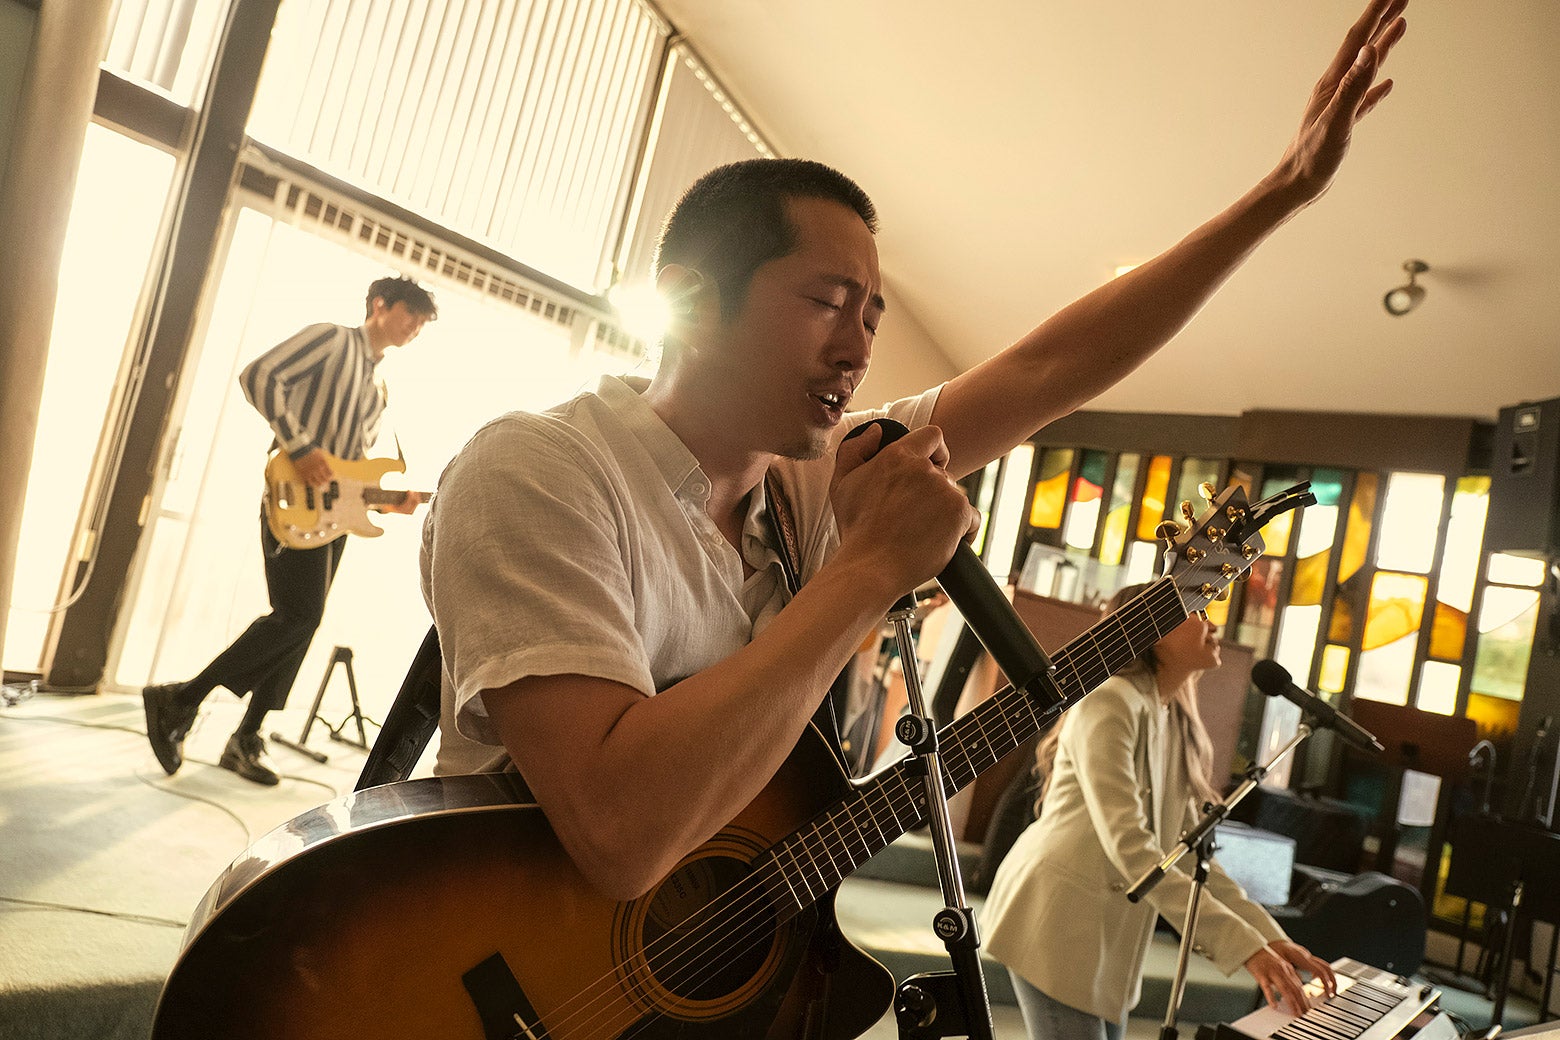 Steven Yuen playing a guitar and singing into a microphone with his left hand in the air.